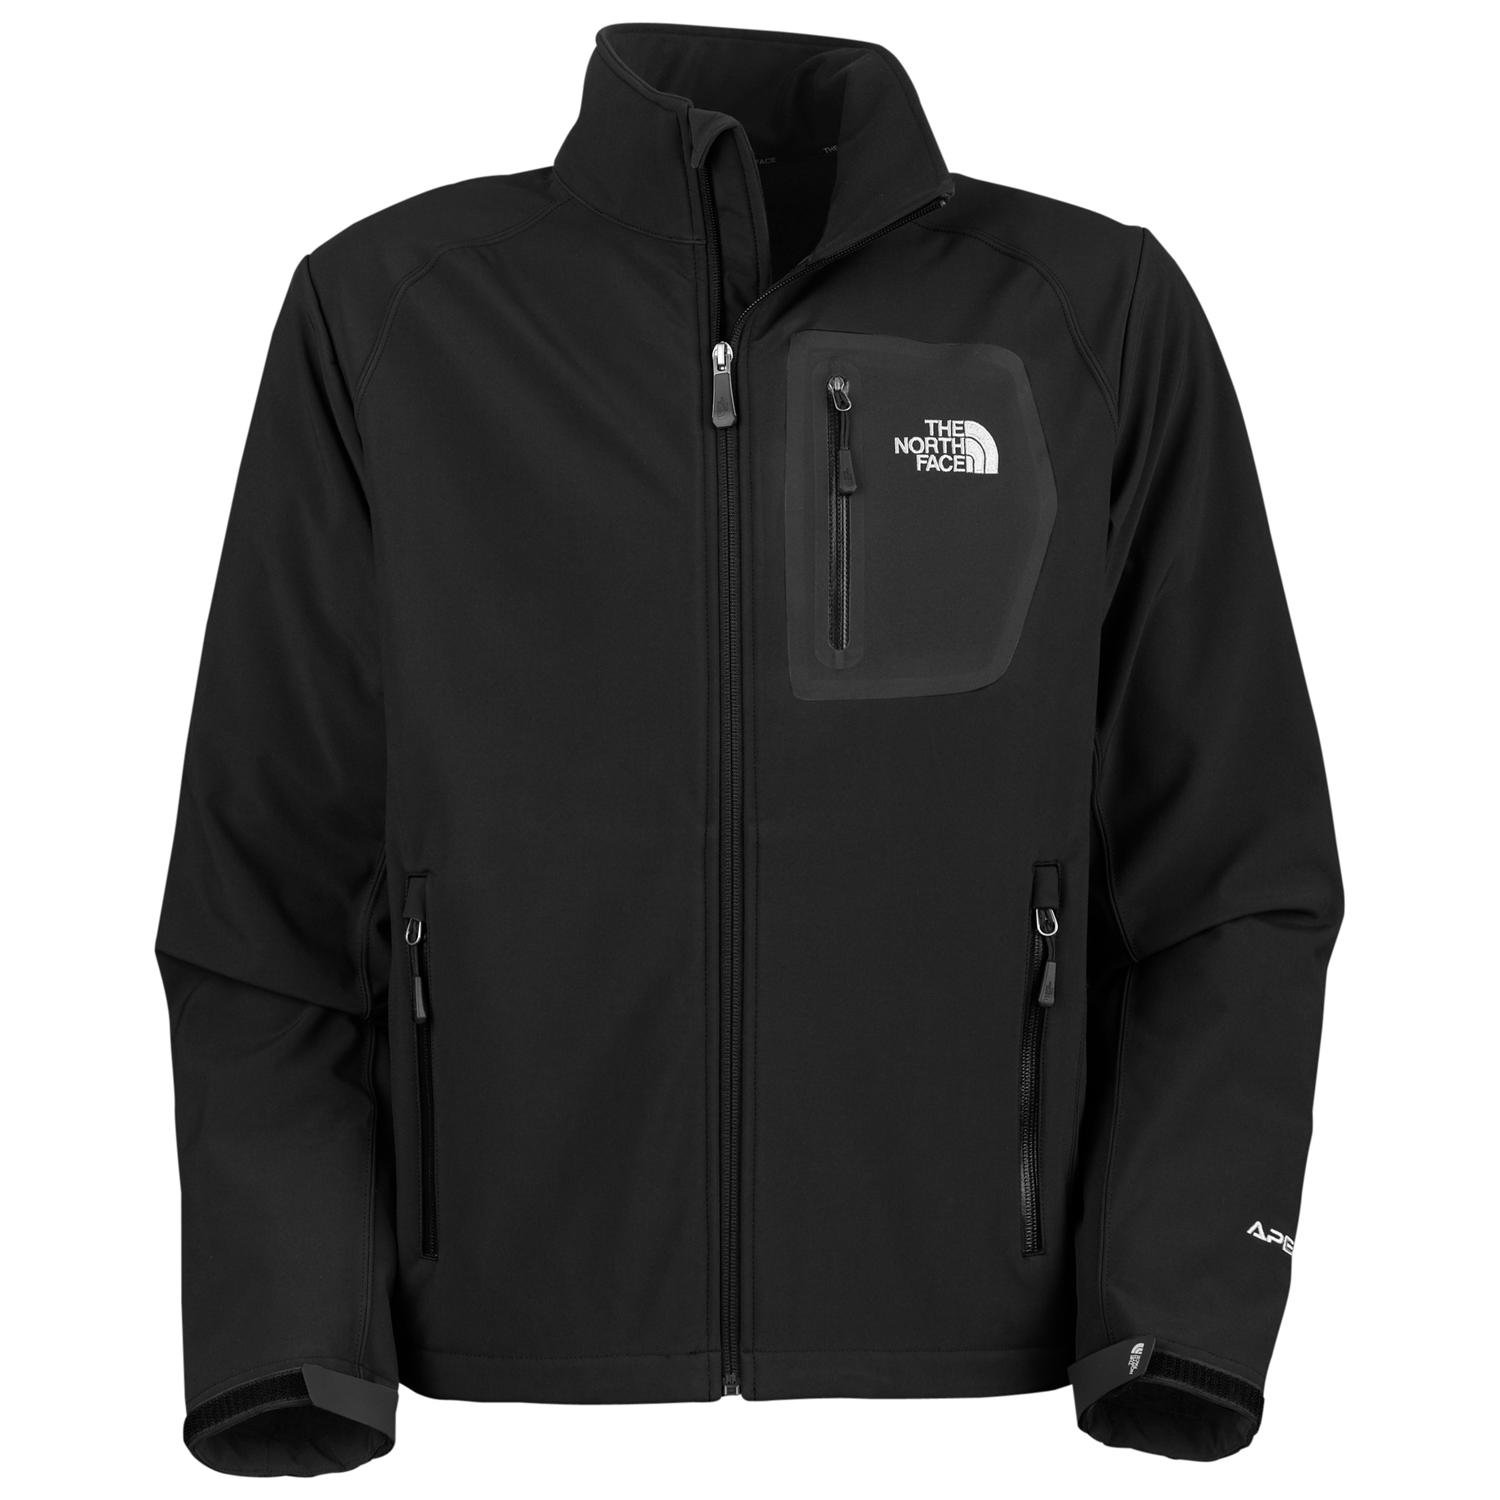 The North Face Apex McKinley Jacket | evo outlet